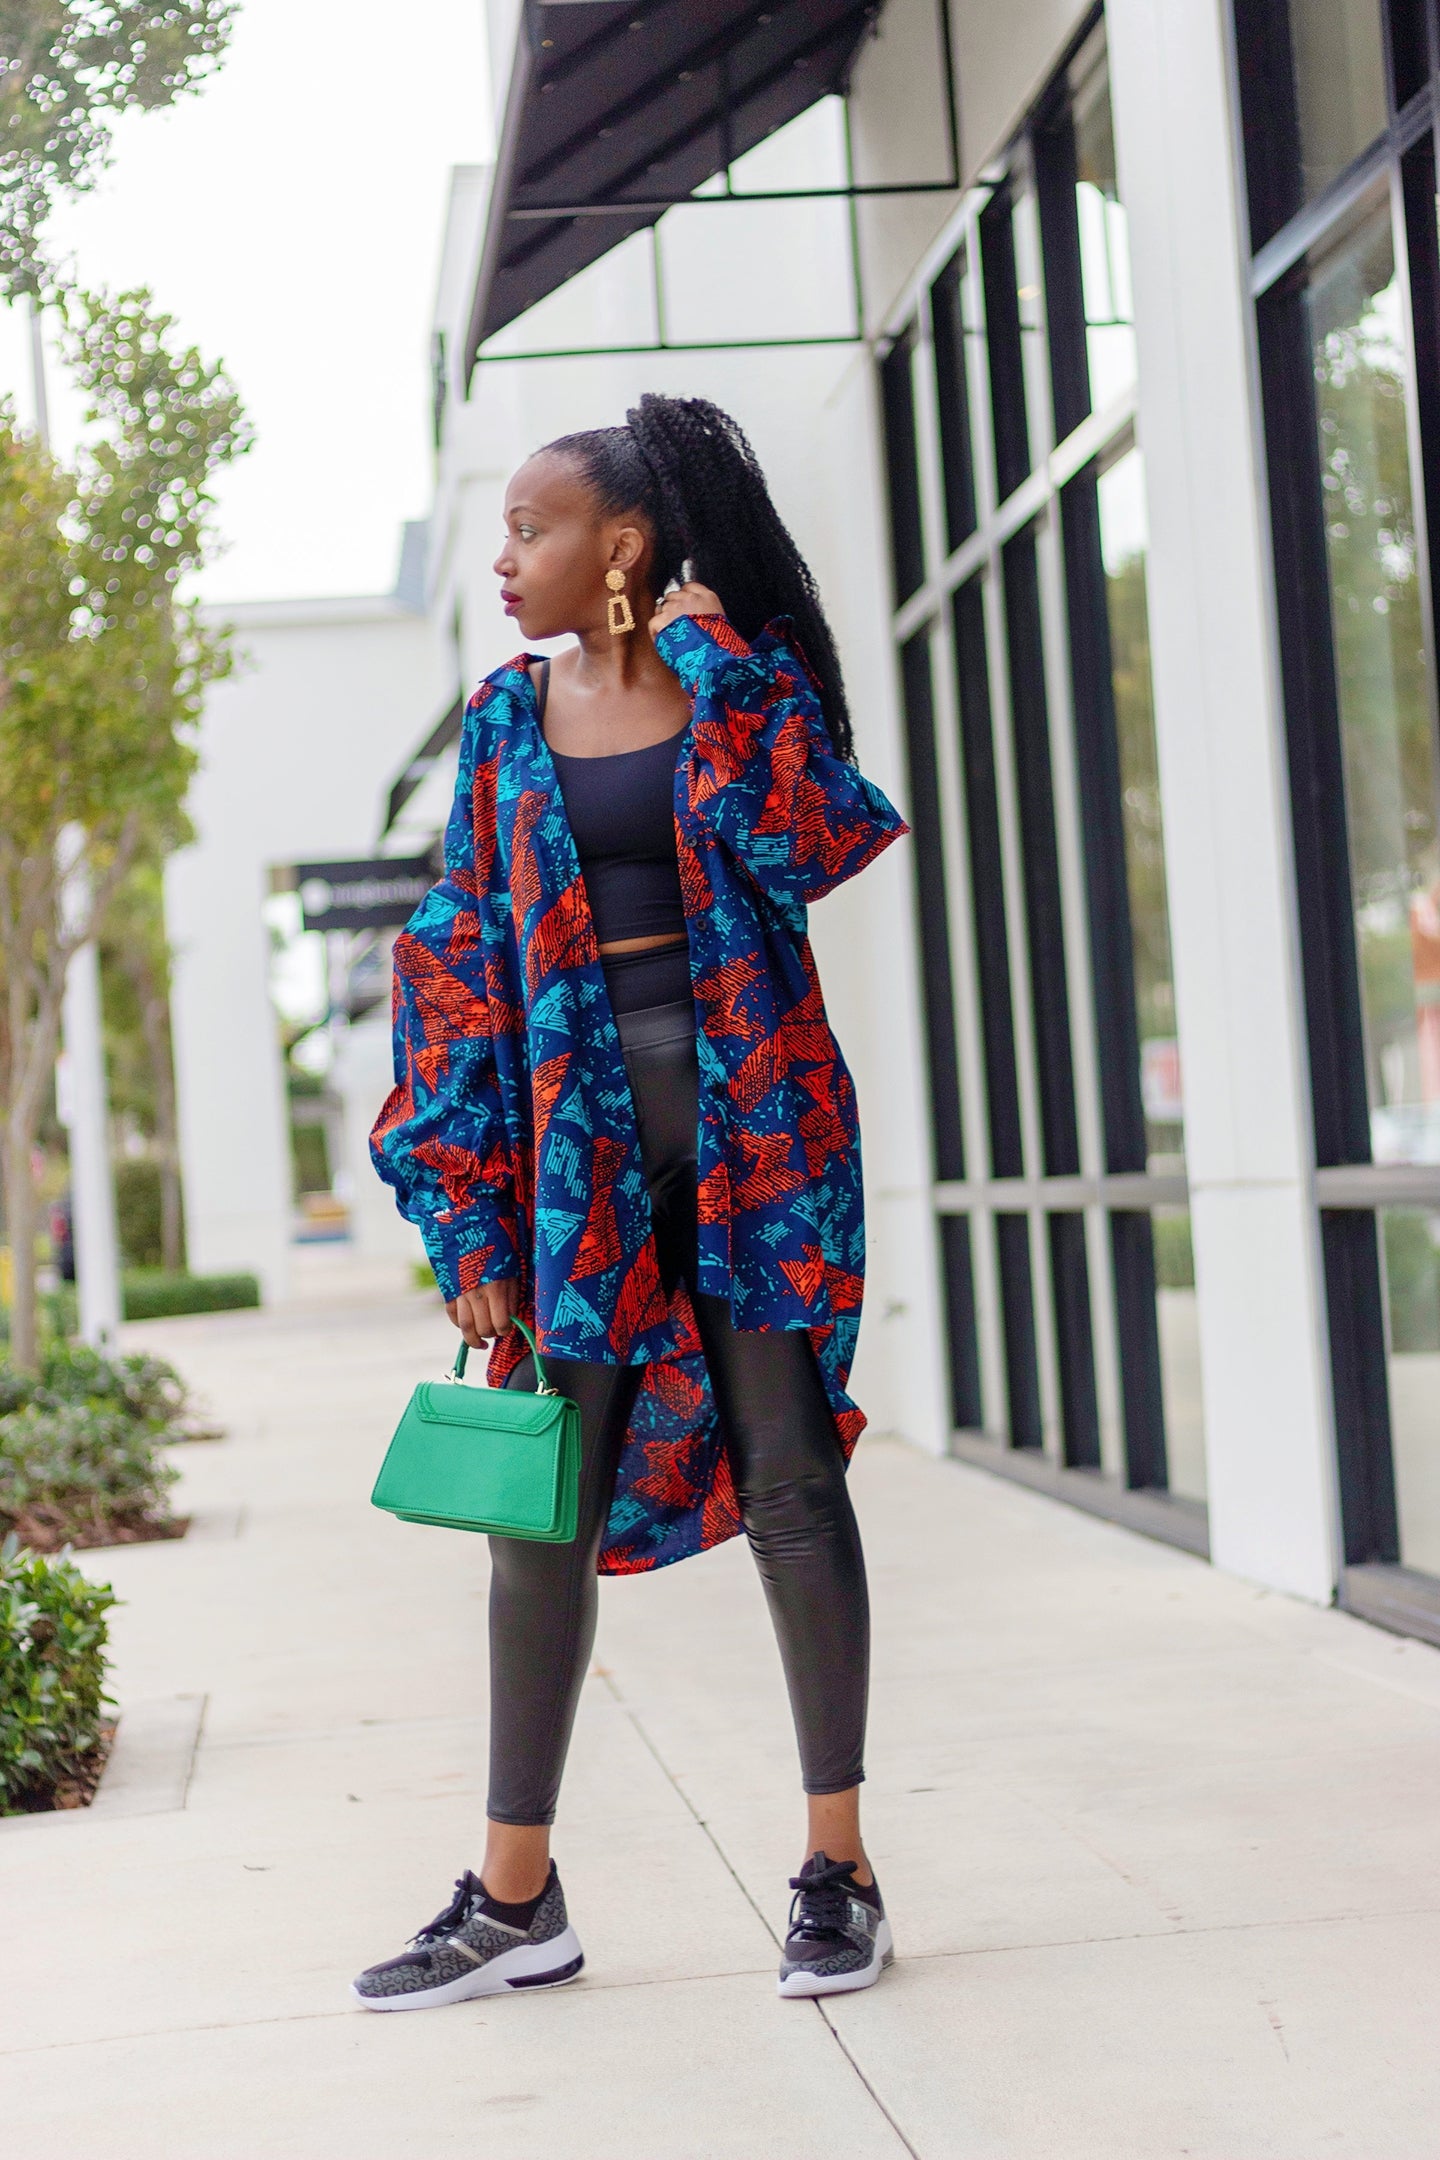 African Print/Ankara/Kitenge High-Low Oversized Shirt with Drop Sleeves and Pockets - Blue/Orange and Teal Abstract Print